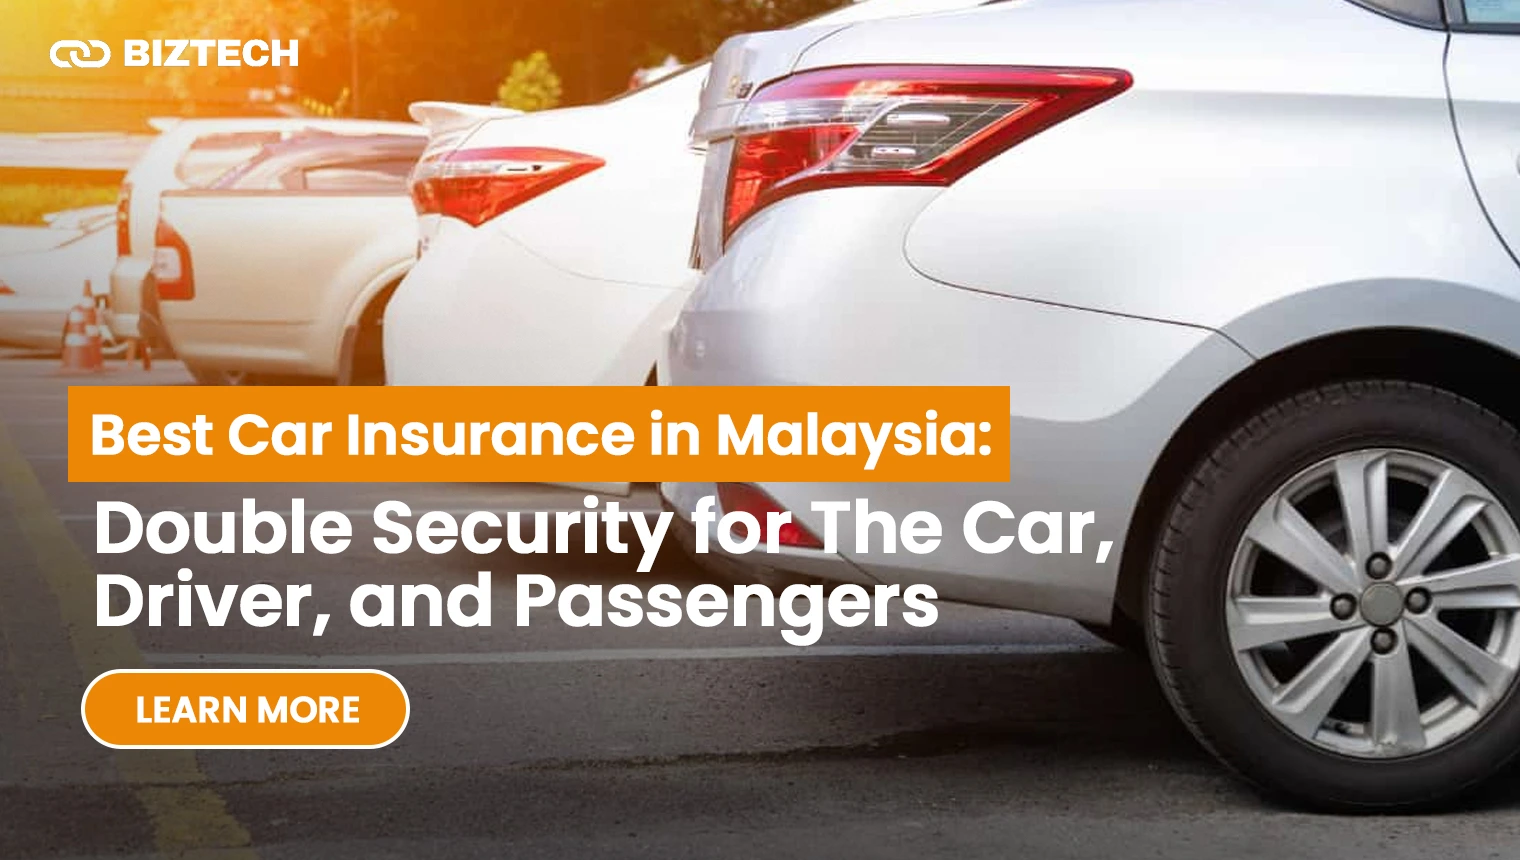 10 Best Car Insurance in Malaysia: Double Security for The Car, Driver, and Passengers